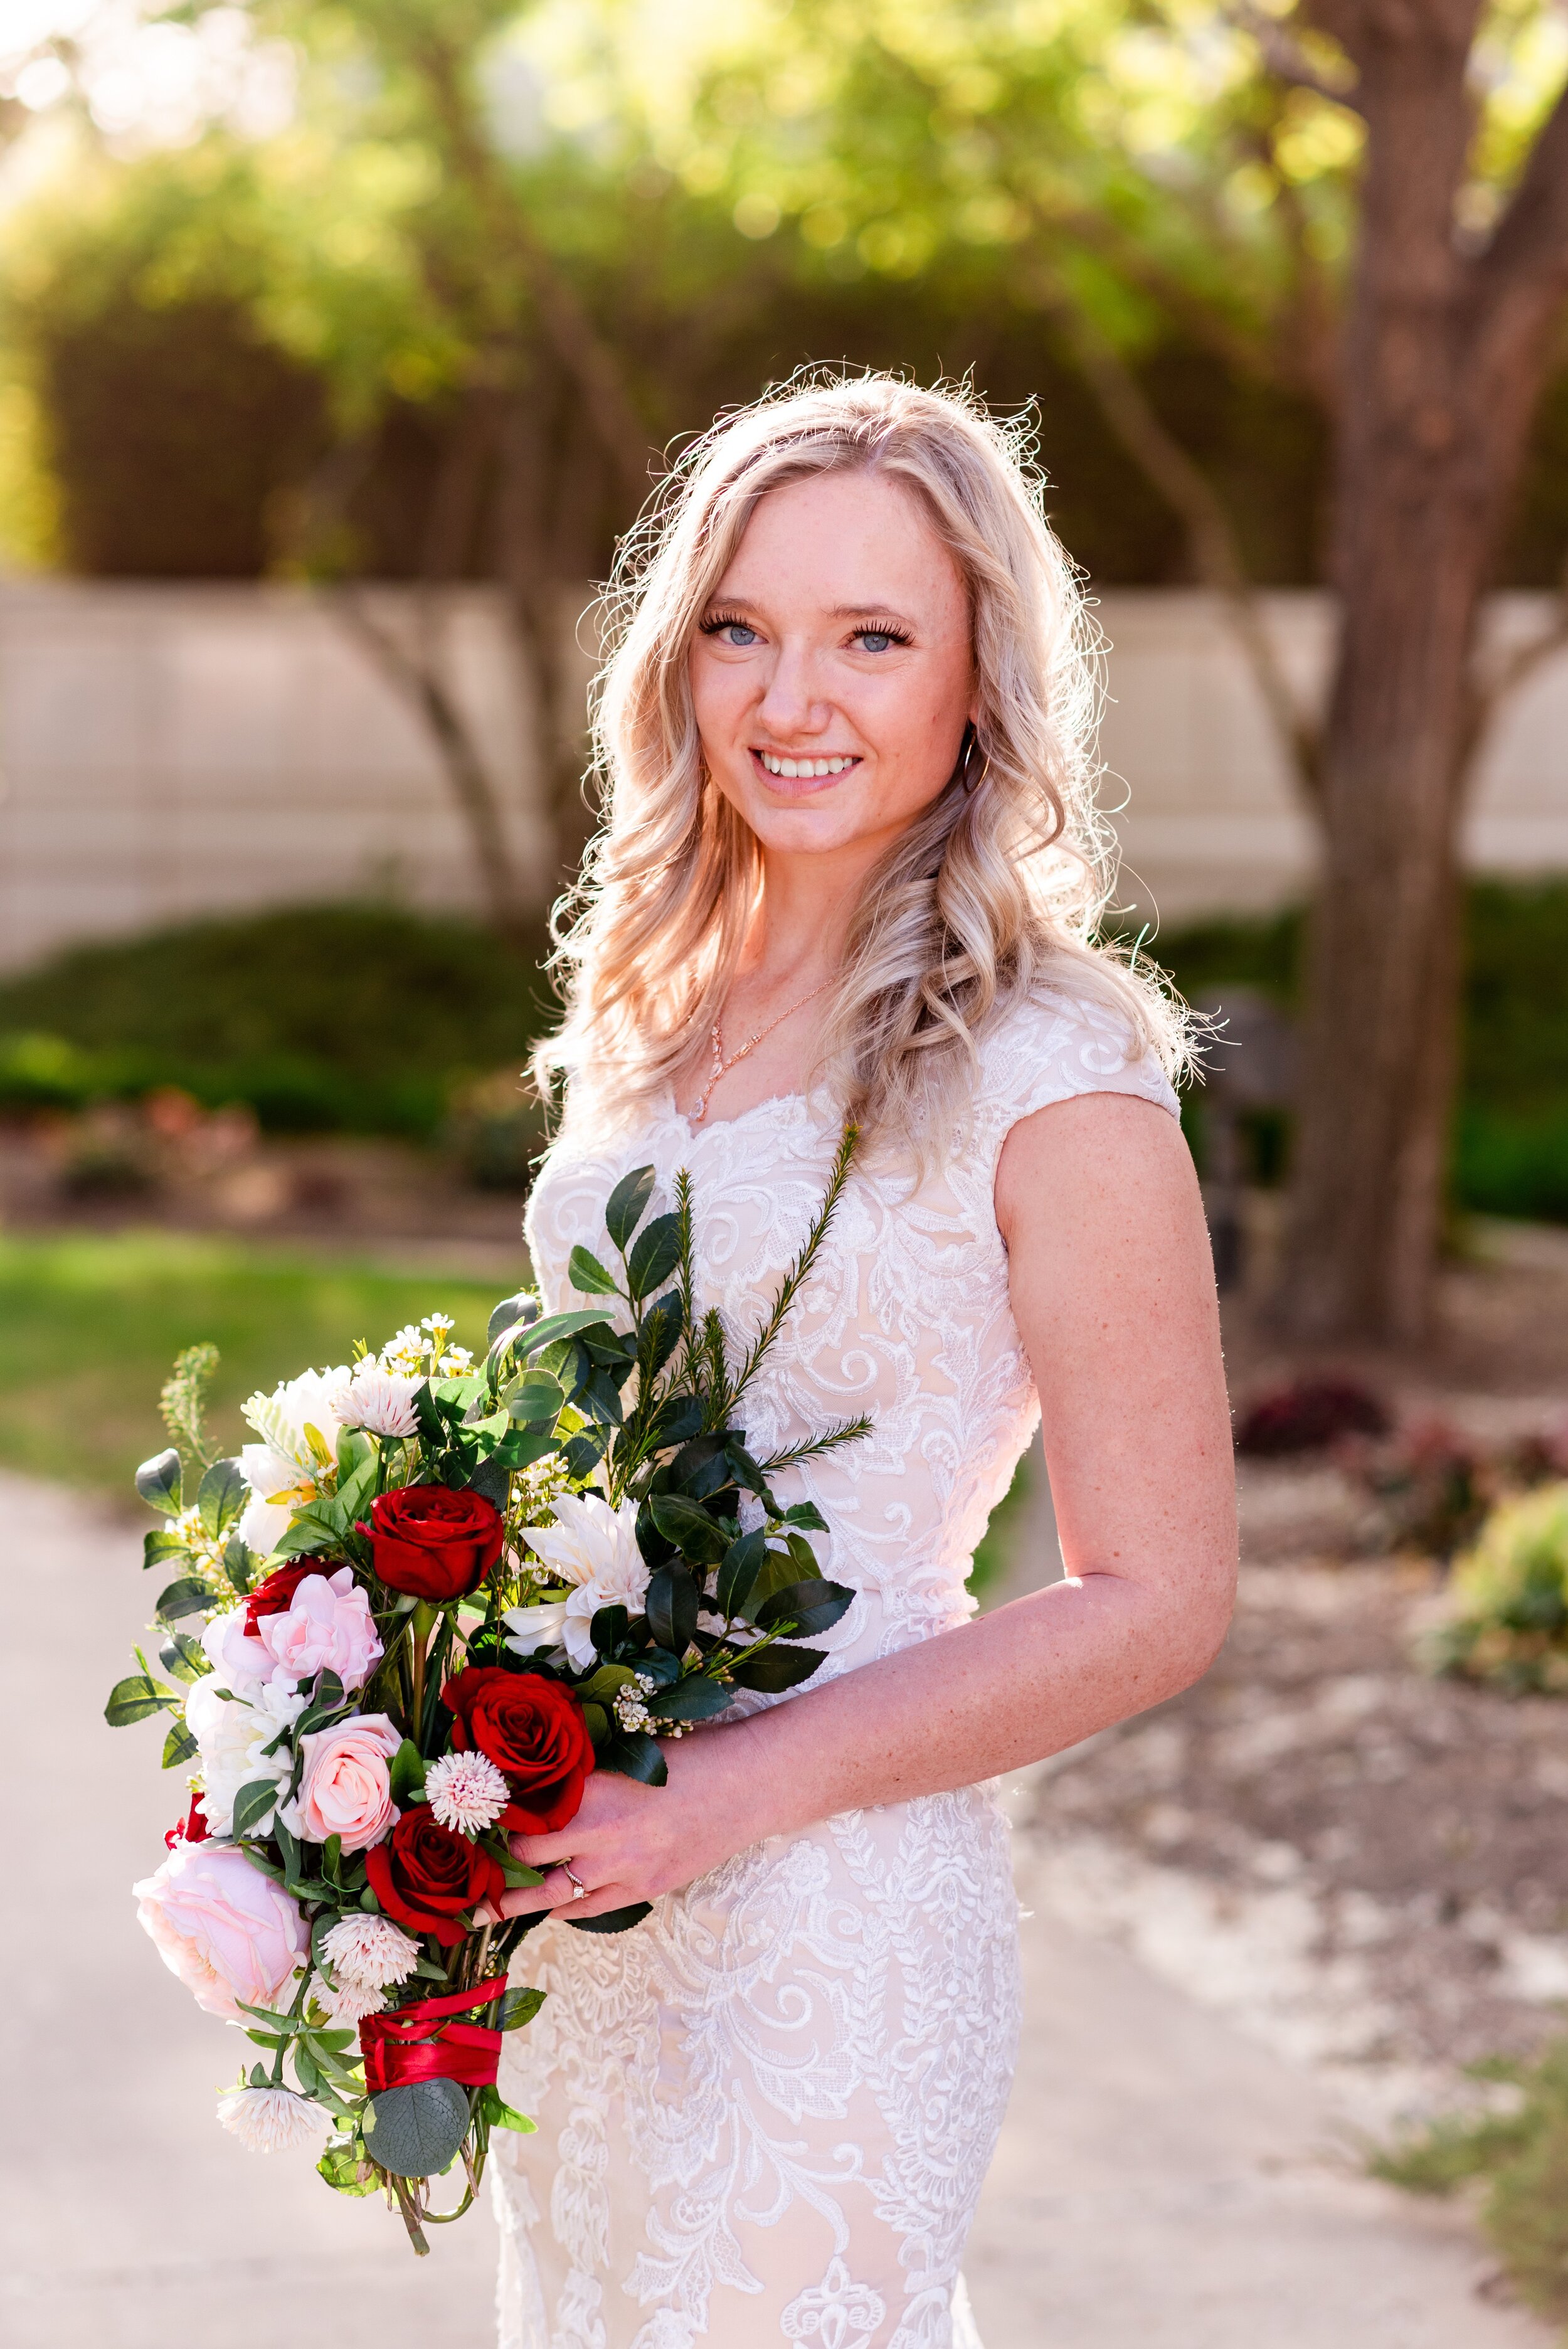  Red &amp; White Bouquet - Columbia River Washington Temple Bridals Wedding Photographer - Tri Cities Wedding Photographer - Morgan Tayler Photo &amp; Design - Moses Lake Temple Wedding Photographer